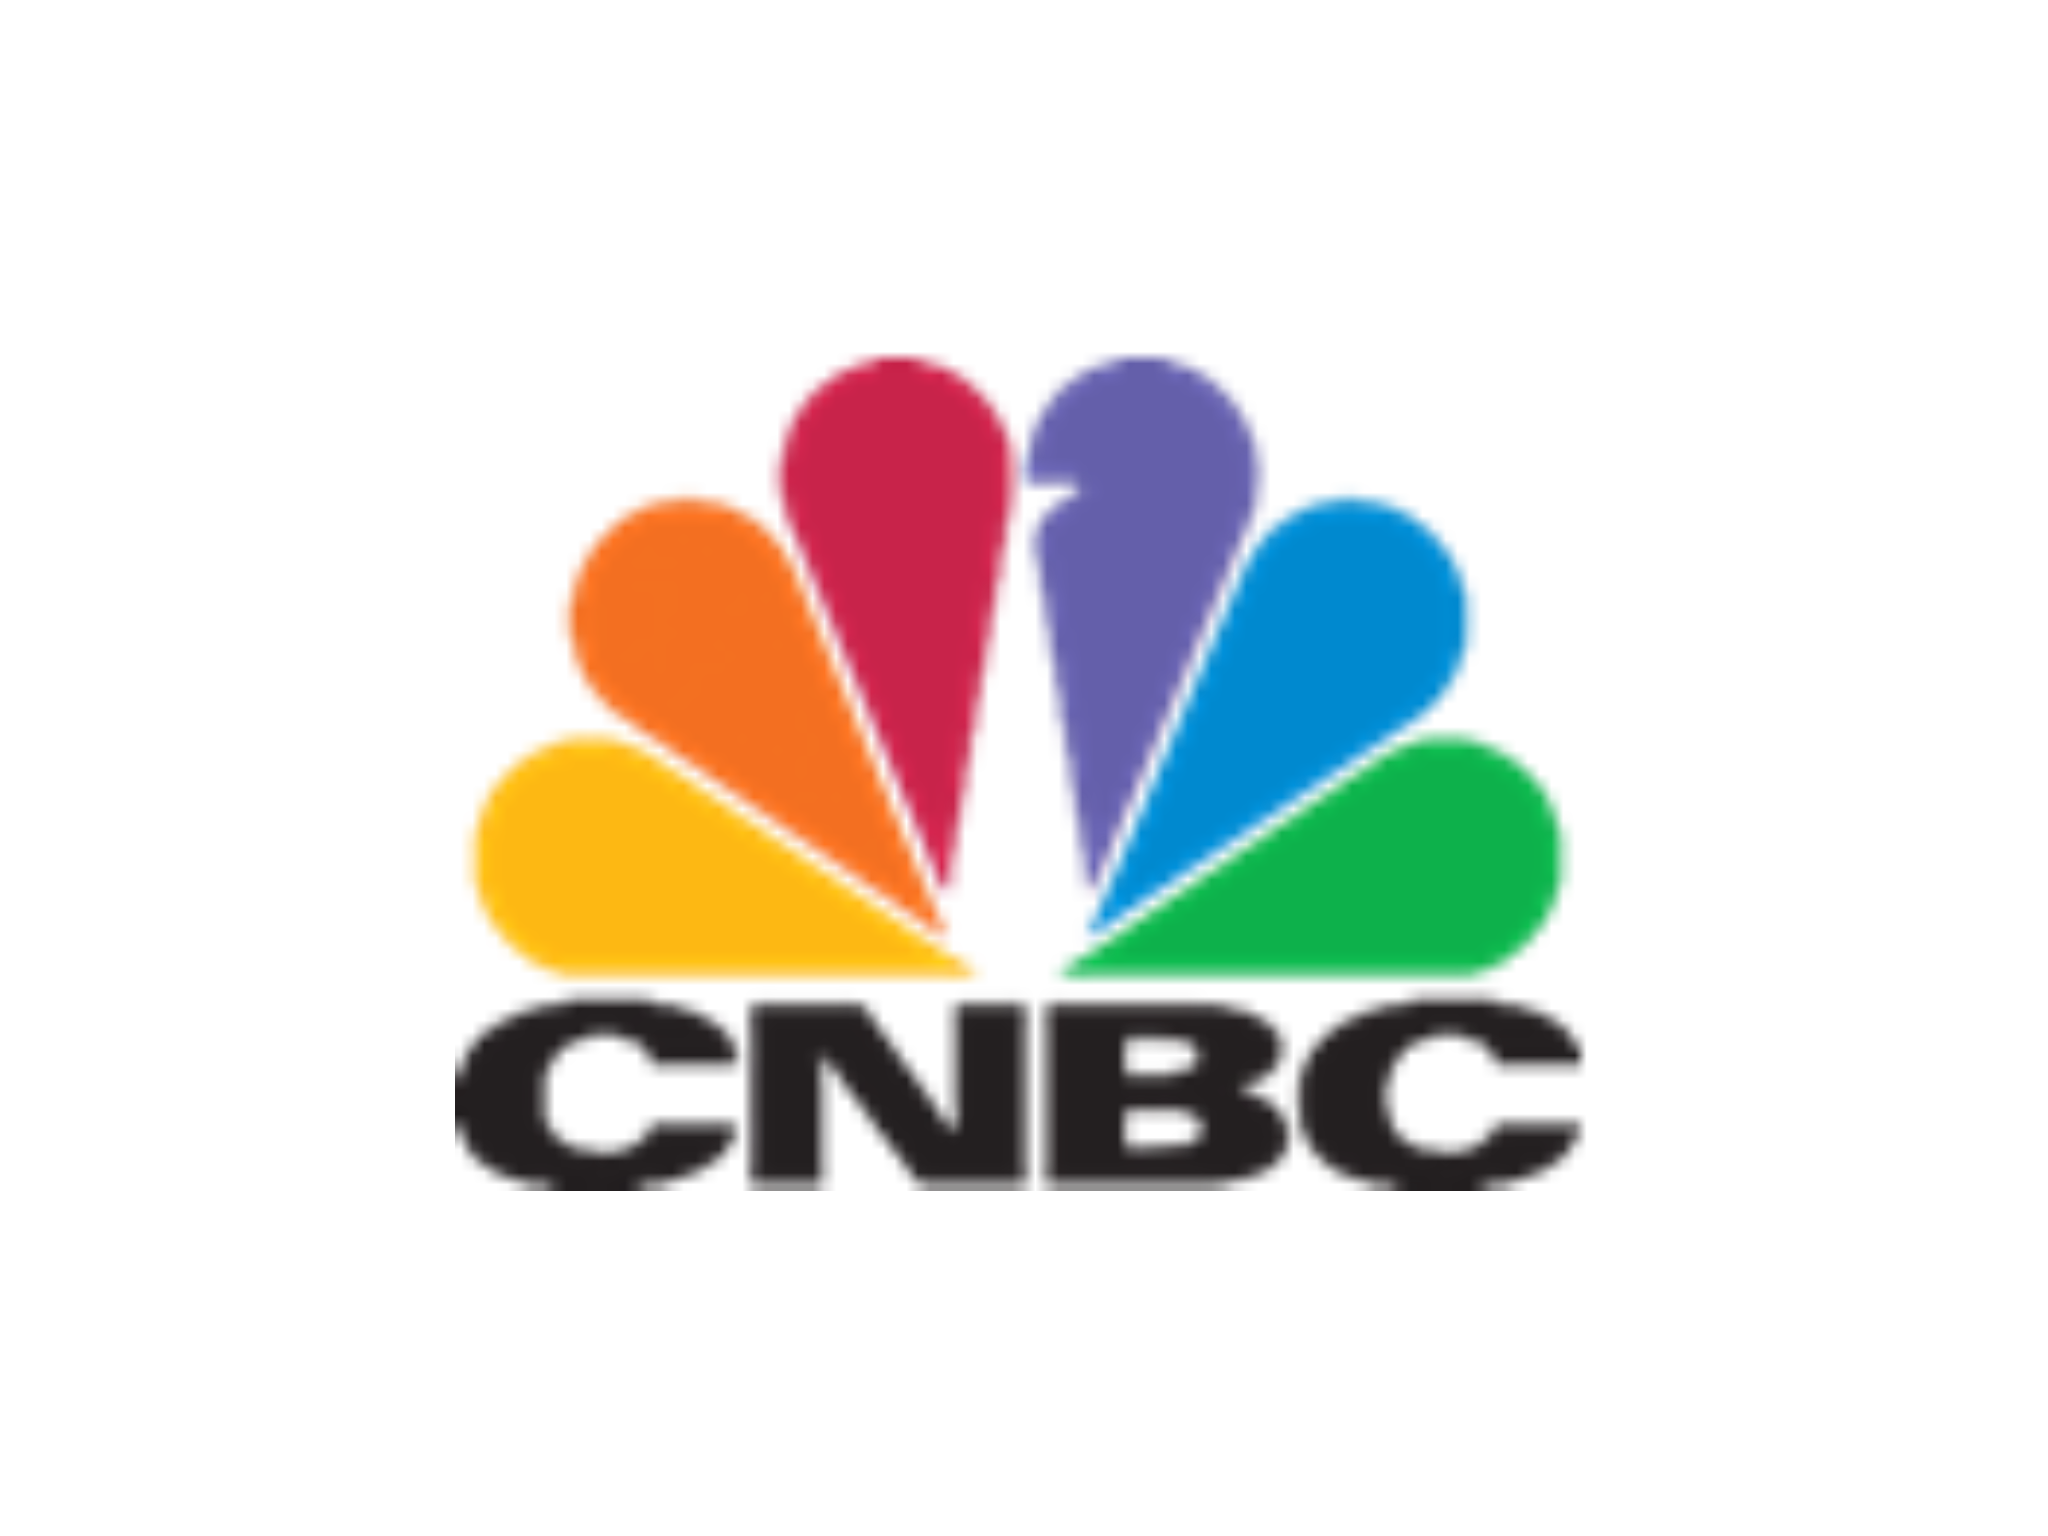 CNBC and Ilbak Holding join forces to launch CNBC Türkiye, delivering premier business and financial news channel